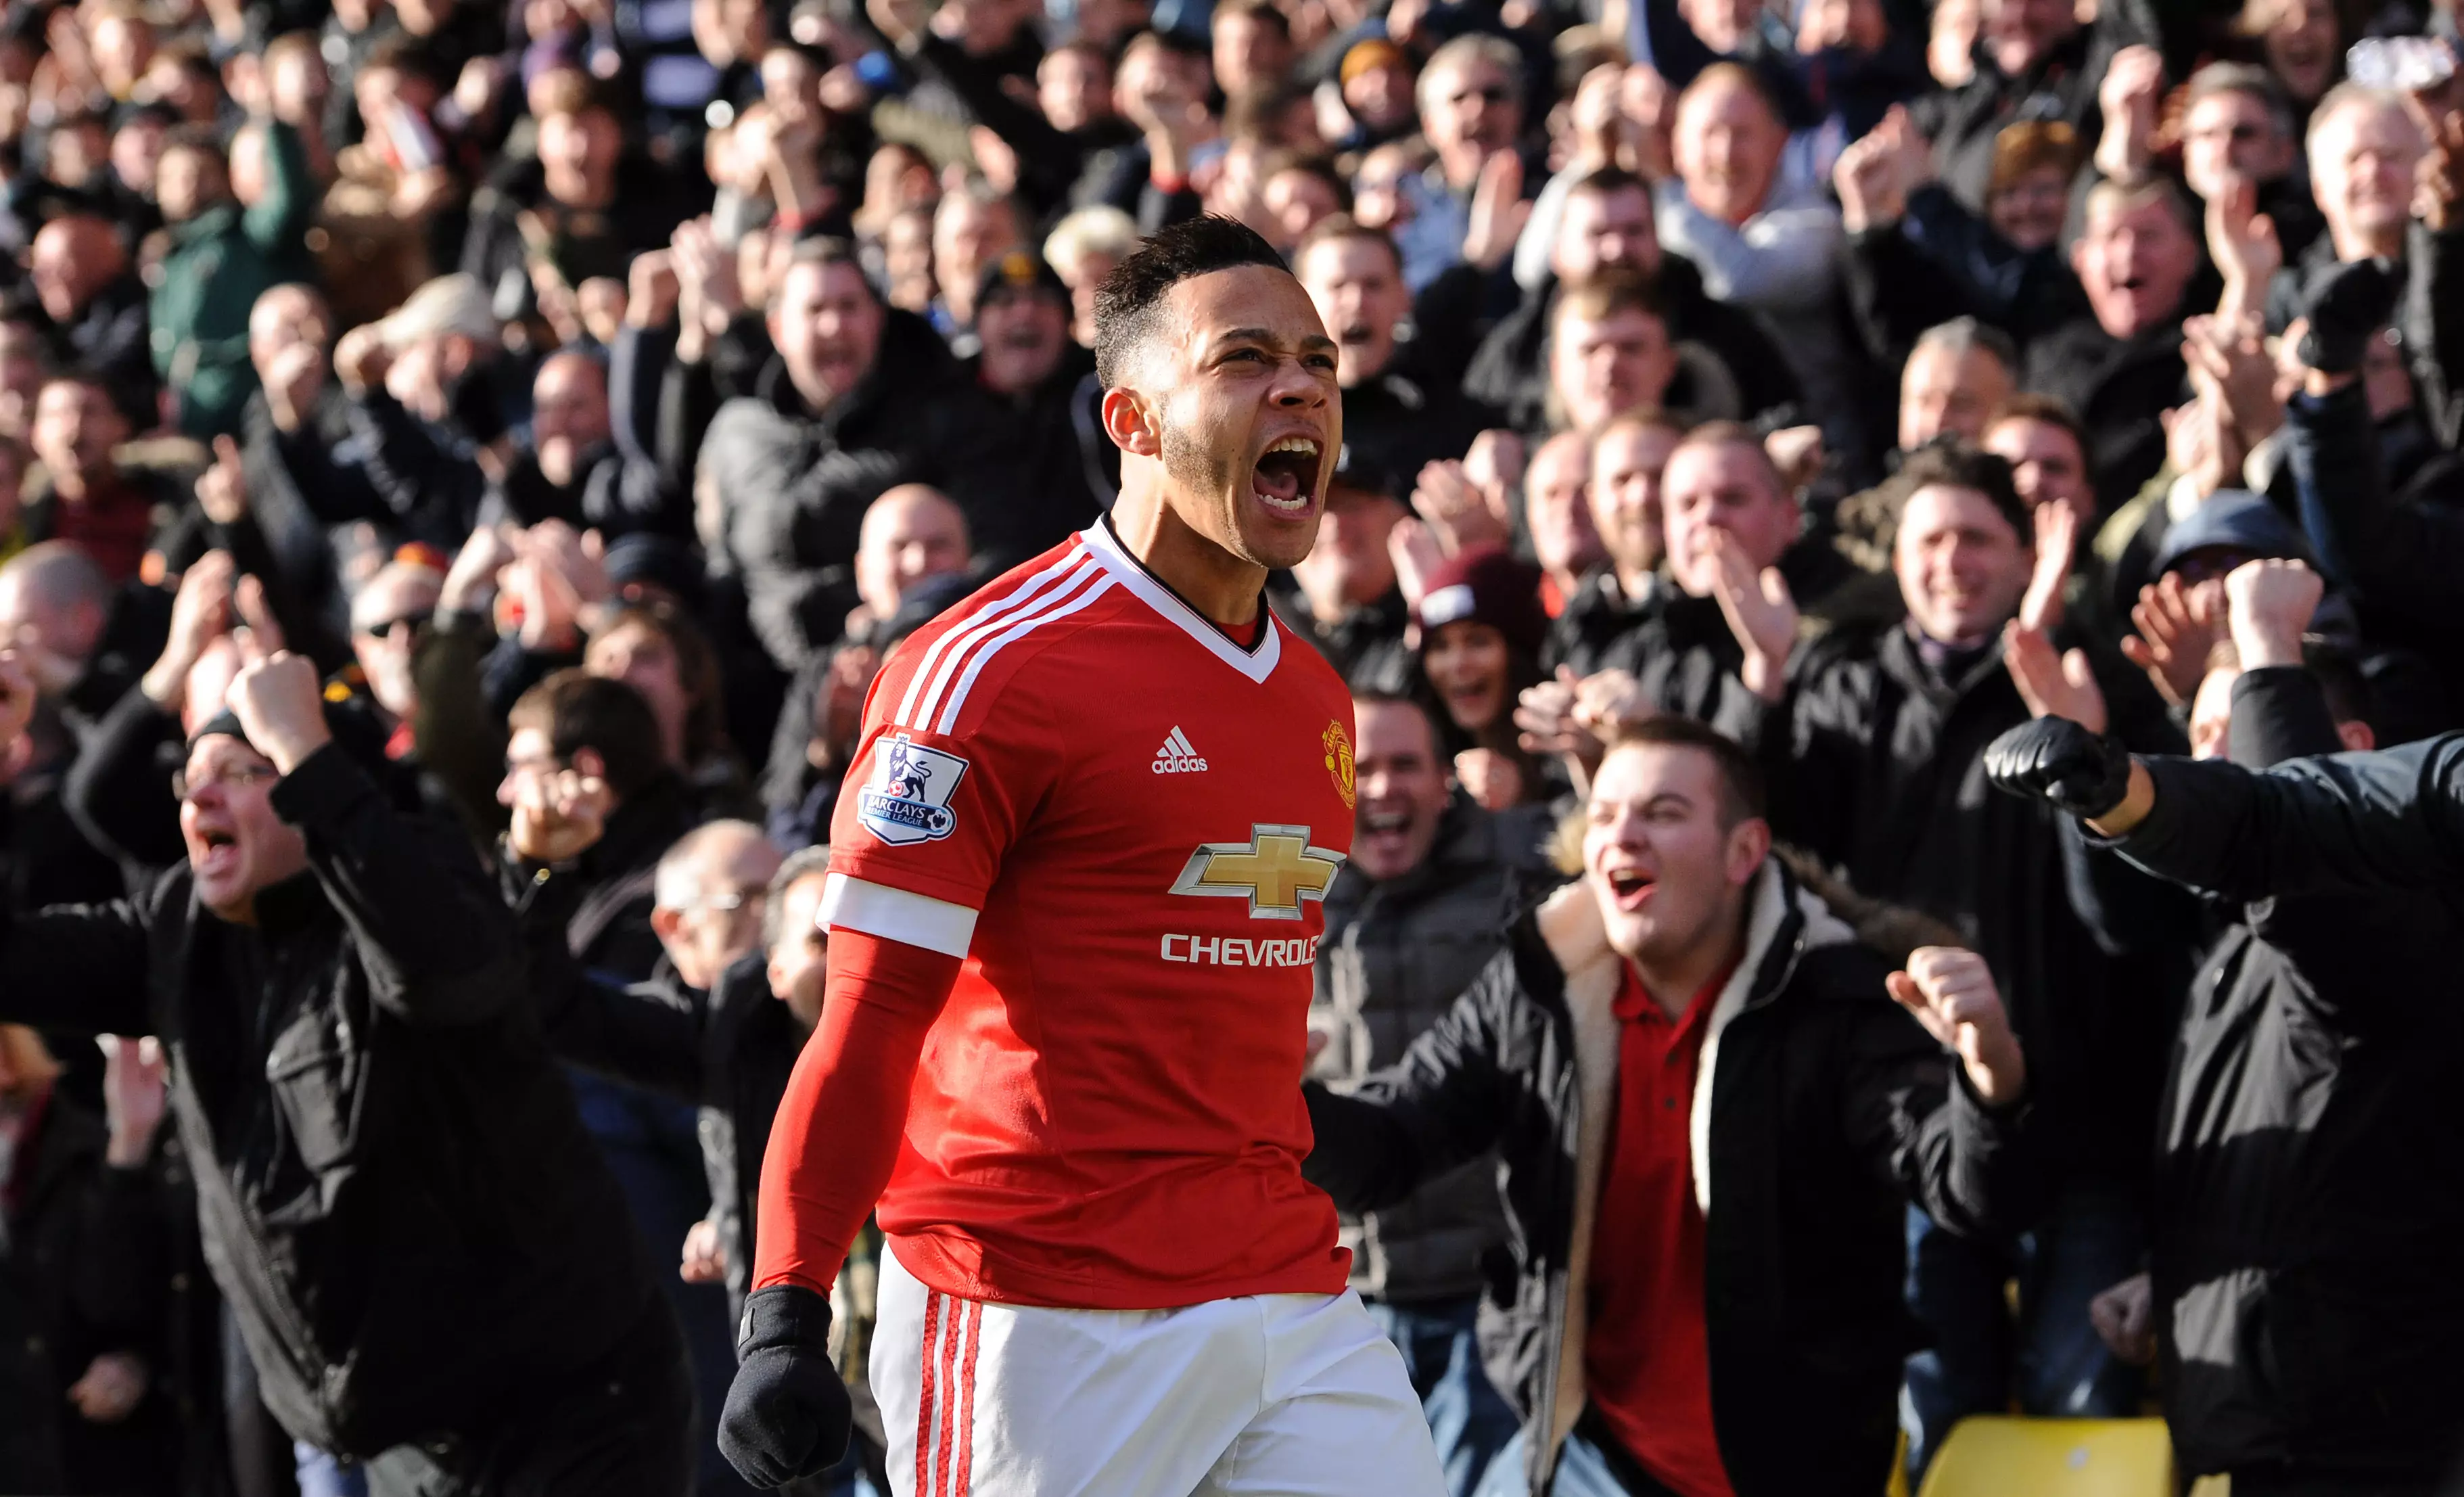 Depay had some success in England. Image: PA Images